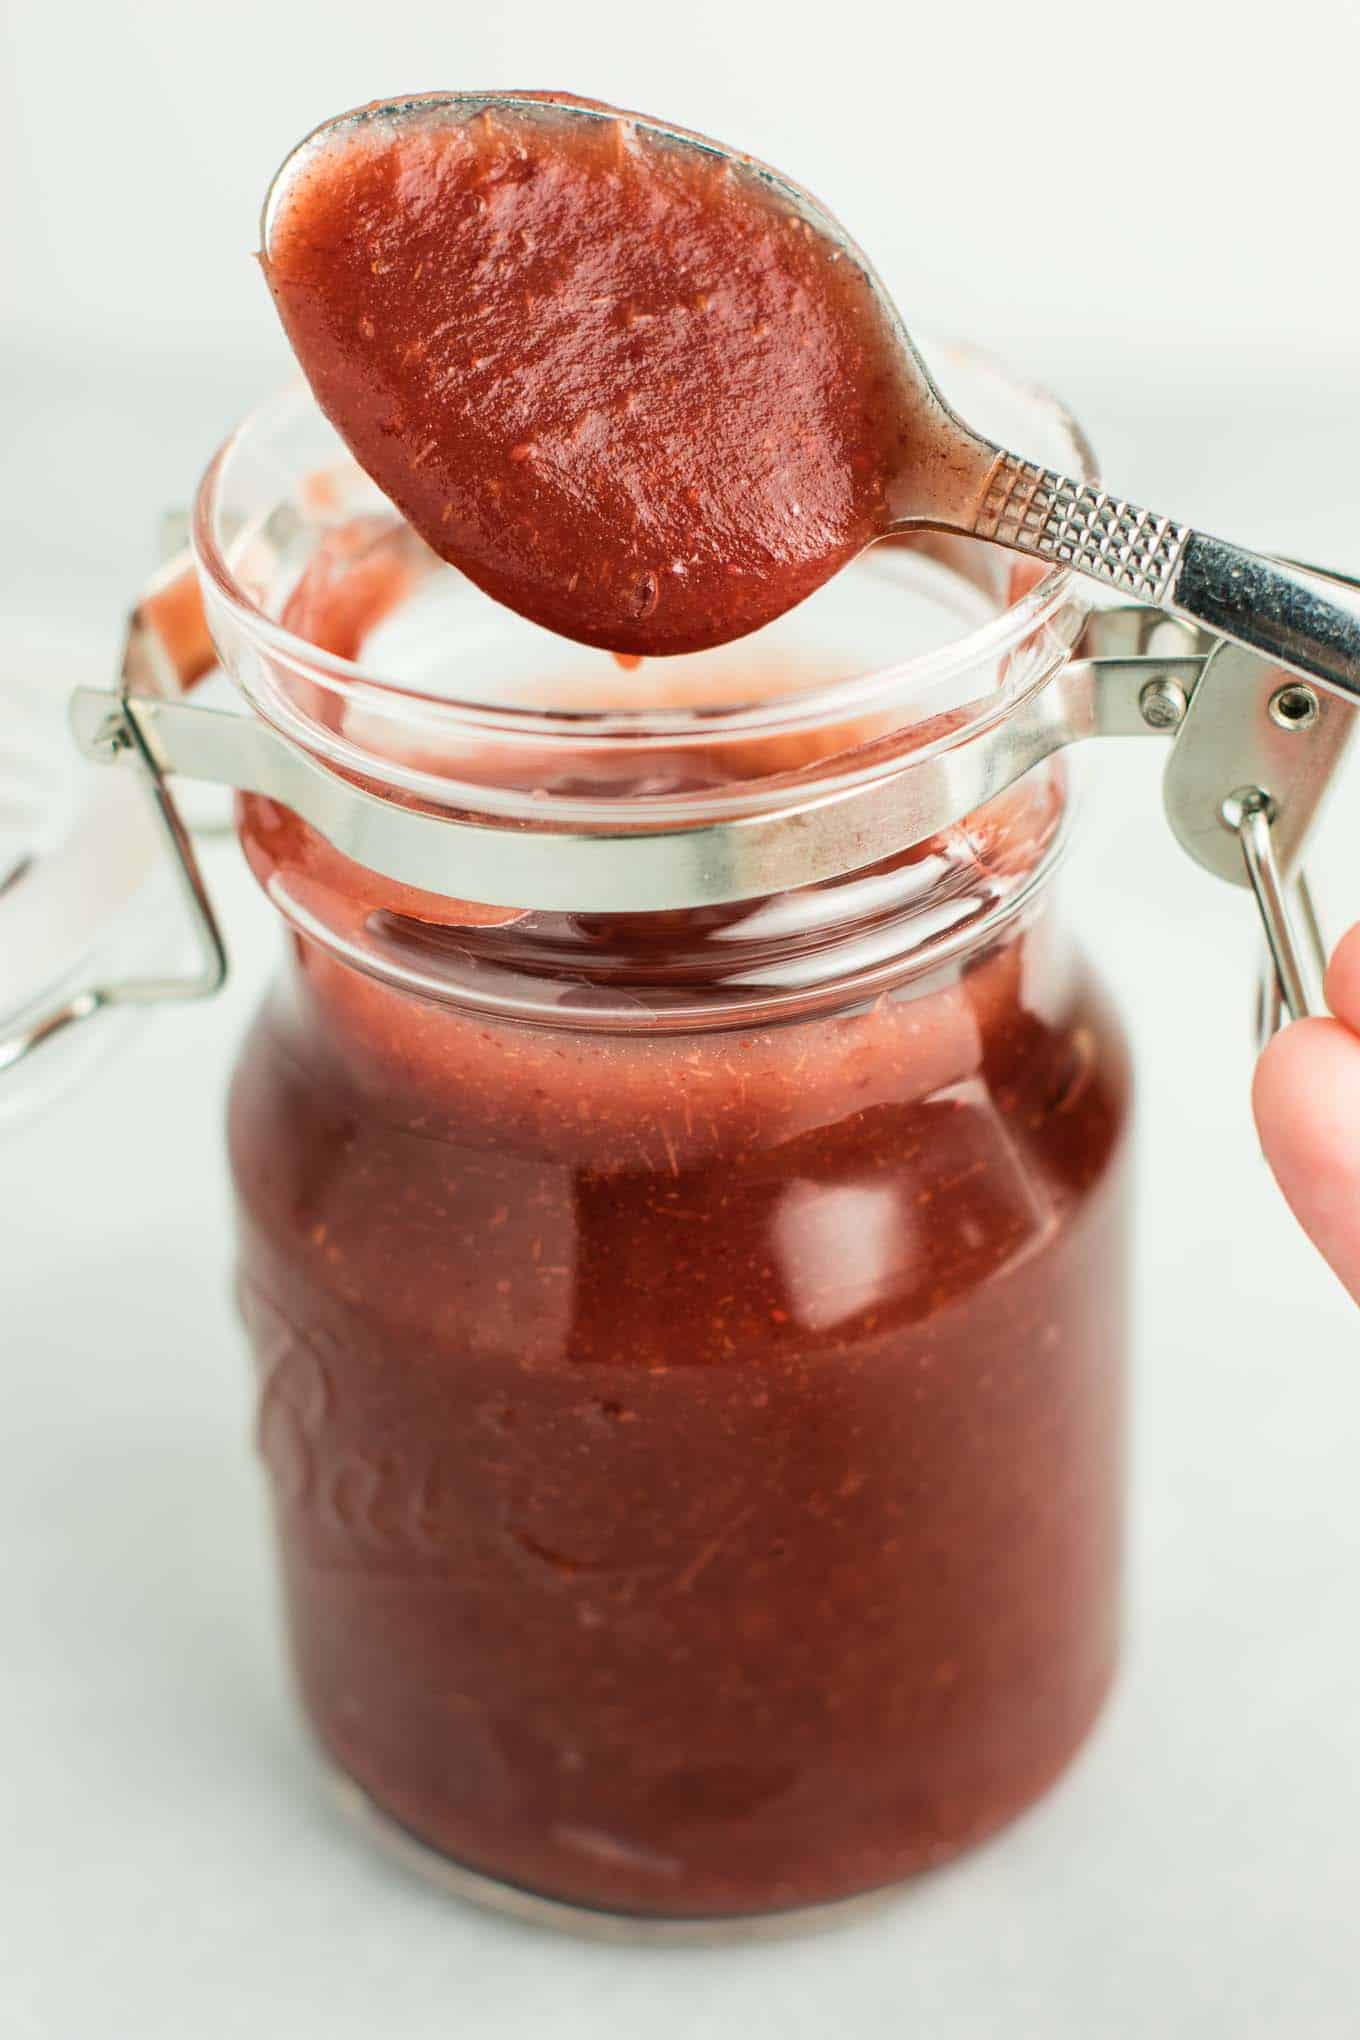 Slow Cooker Cranberry Apple Butter recipe made with just 4 ingredients. Your house will smell amazing while this cooks! (vegan, gluten free, naturally sweetened) #cranberryapplebutter #slowcooker #crockpot #vegan #glutenfree 